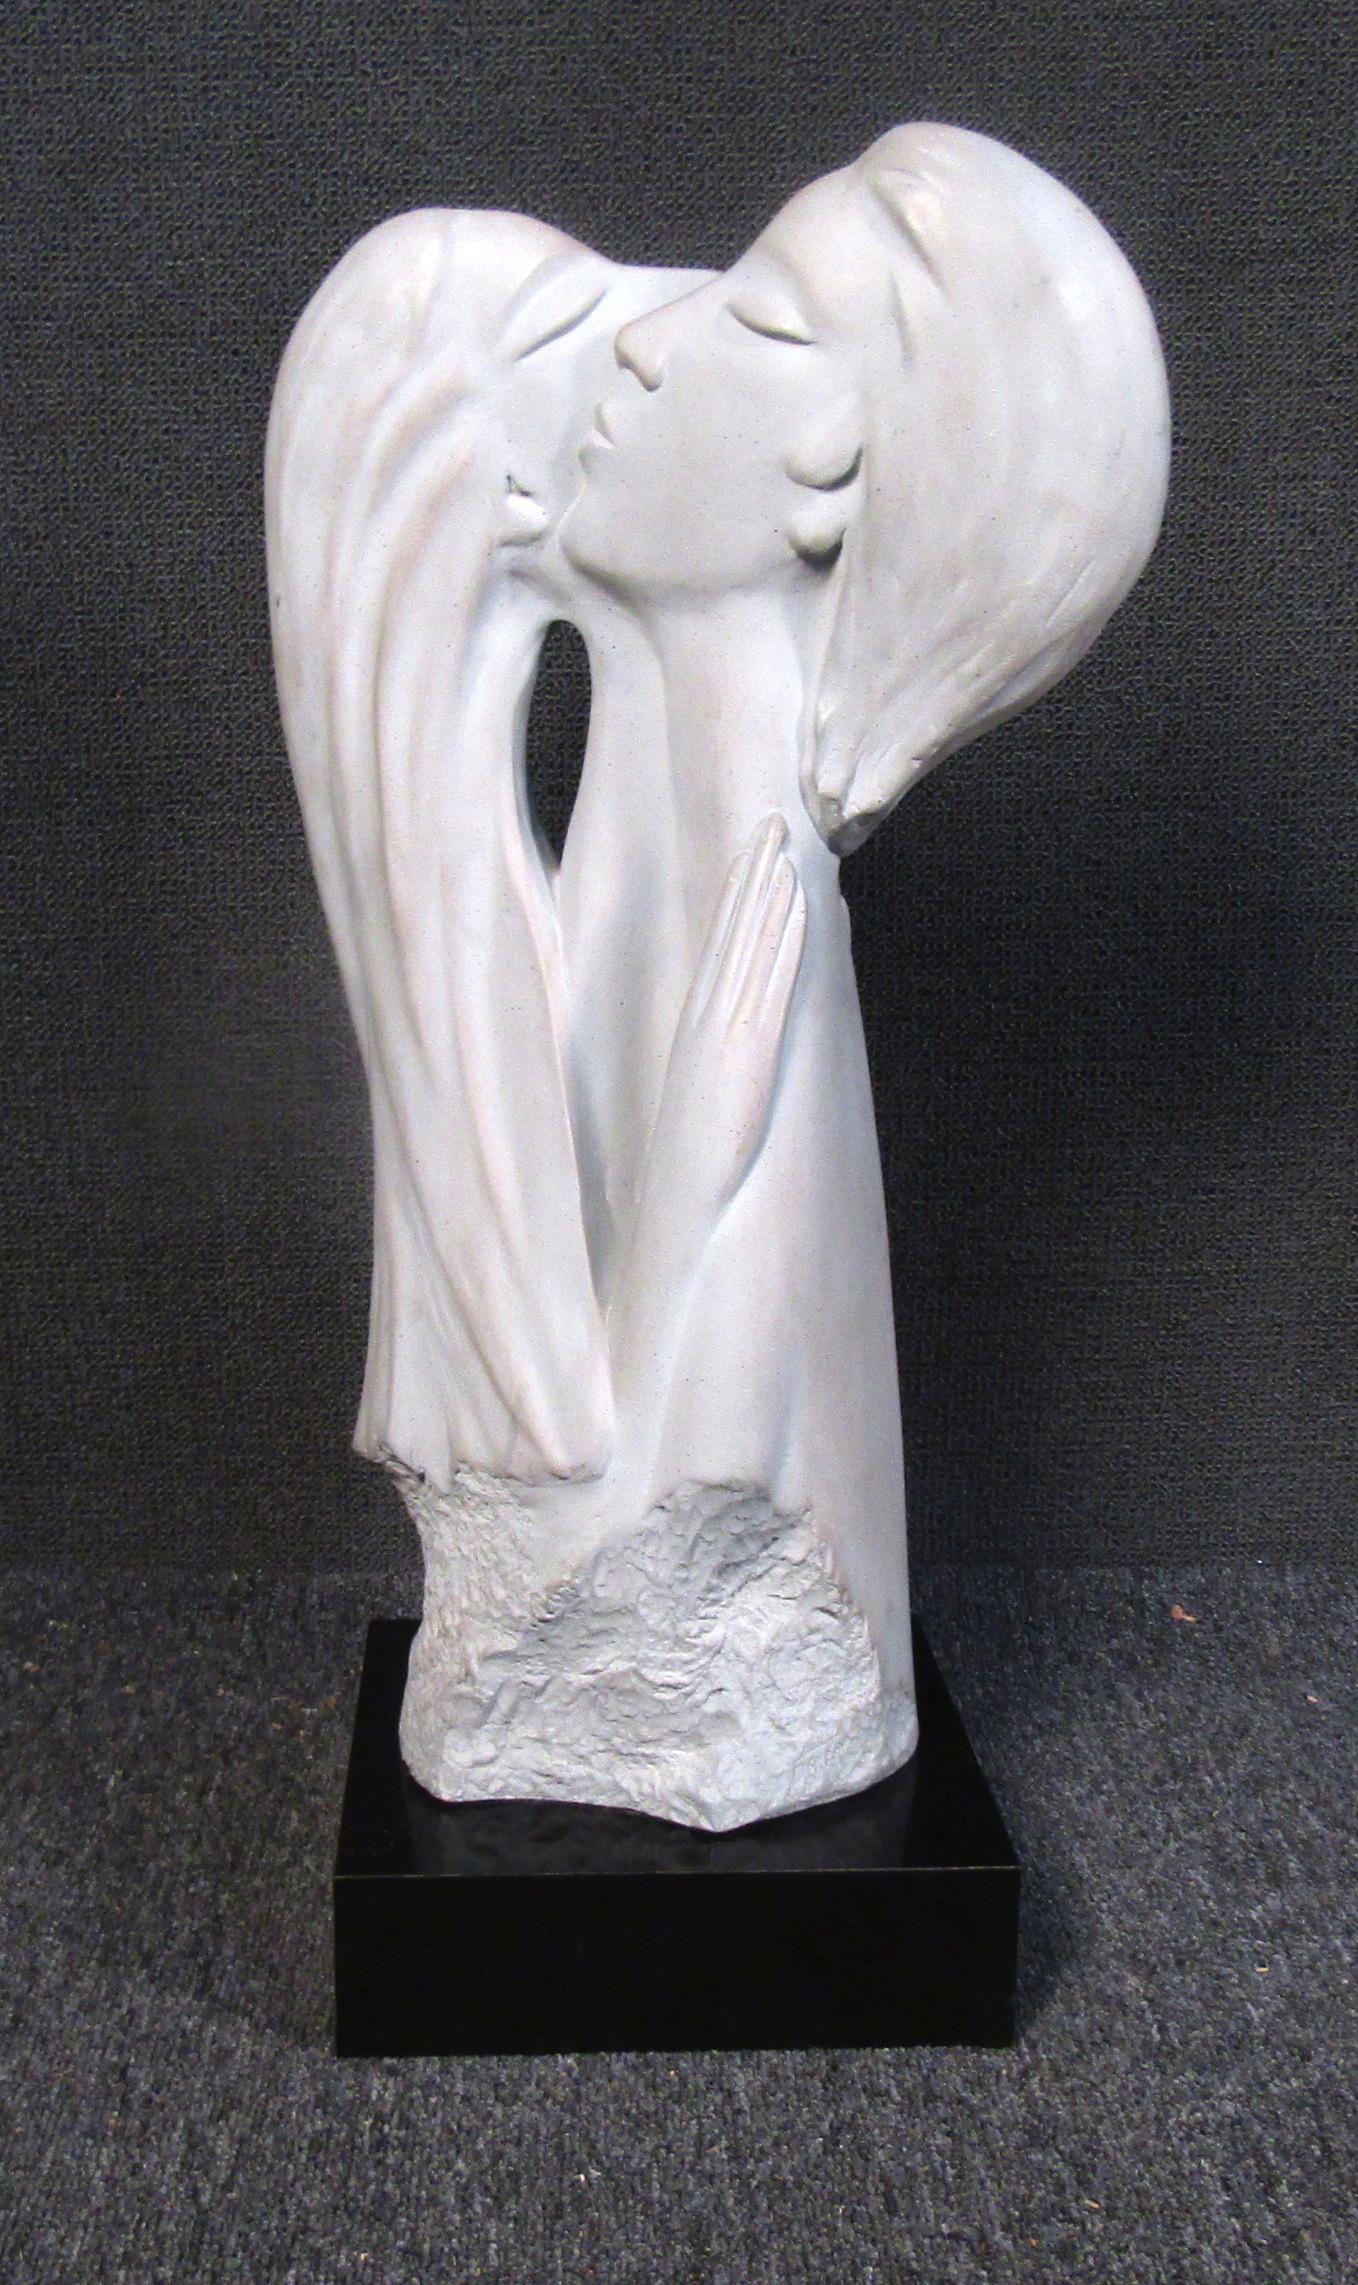 One of a kind elegant sculpture of two figures embracing. The sculpture is made of a white stone like material, on a polished black base. Signed and dated by Austin Productions circa 1985.

Please confirm item location (NY or NJ).